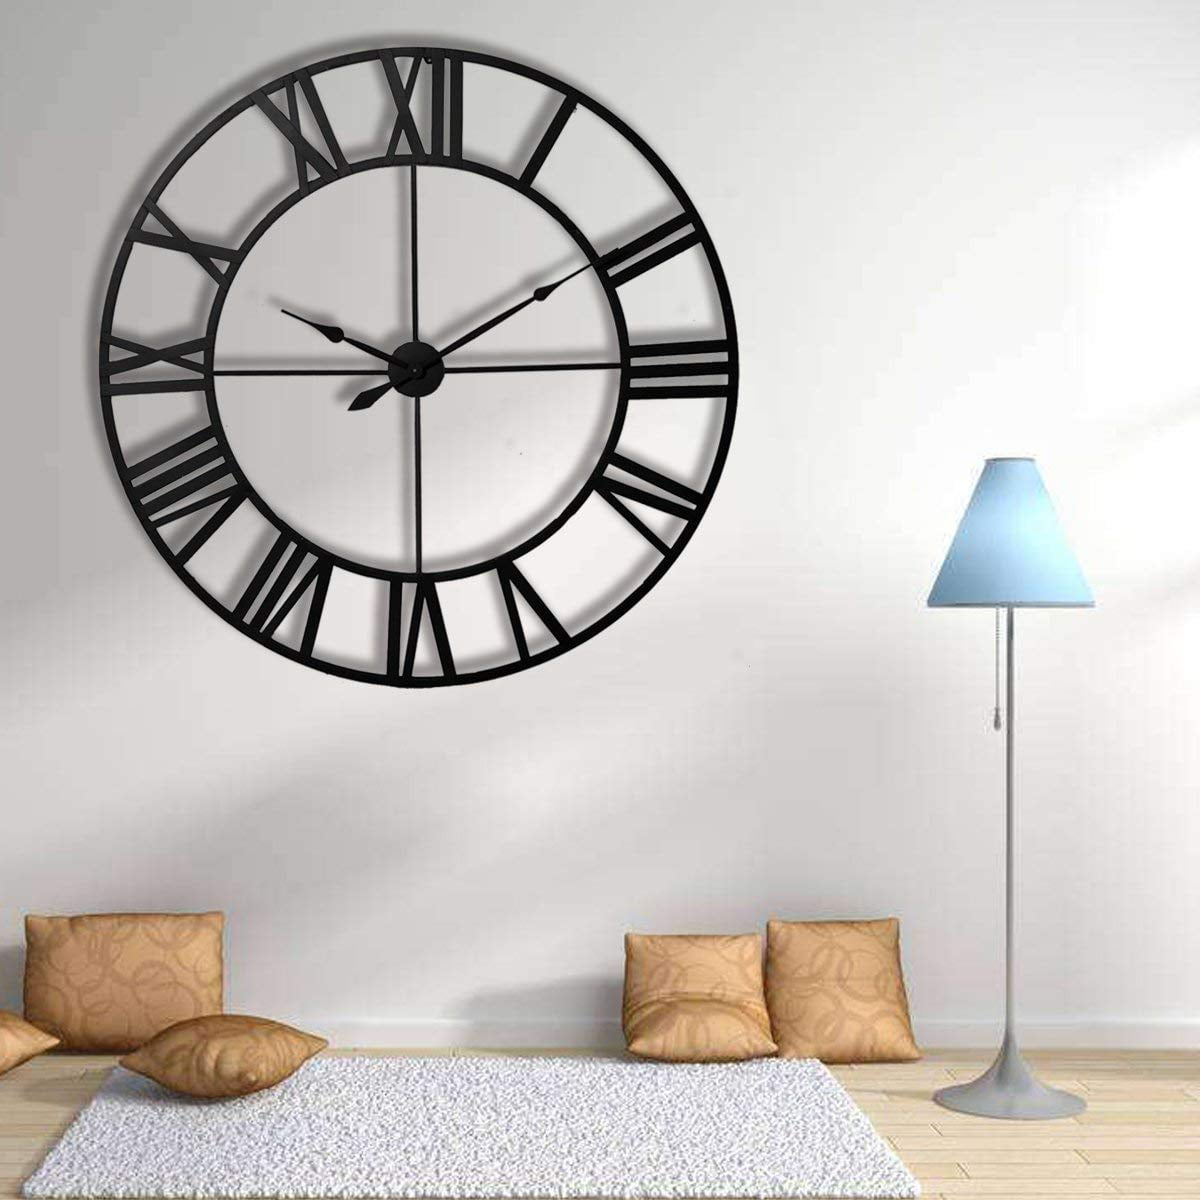 Vintage Silver Metal Large Wall Clock Roman Style Round Silent Non-ticking Battery Operated Roman Numerals Clocks for Living Room,Bedroom,Kitchen Decor